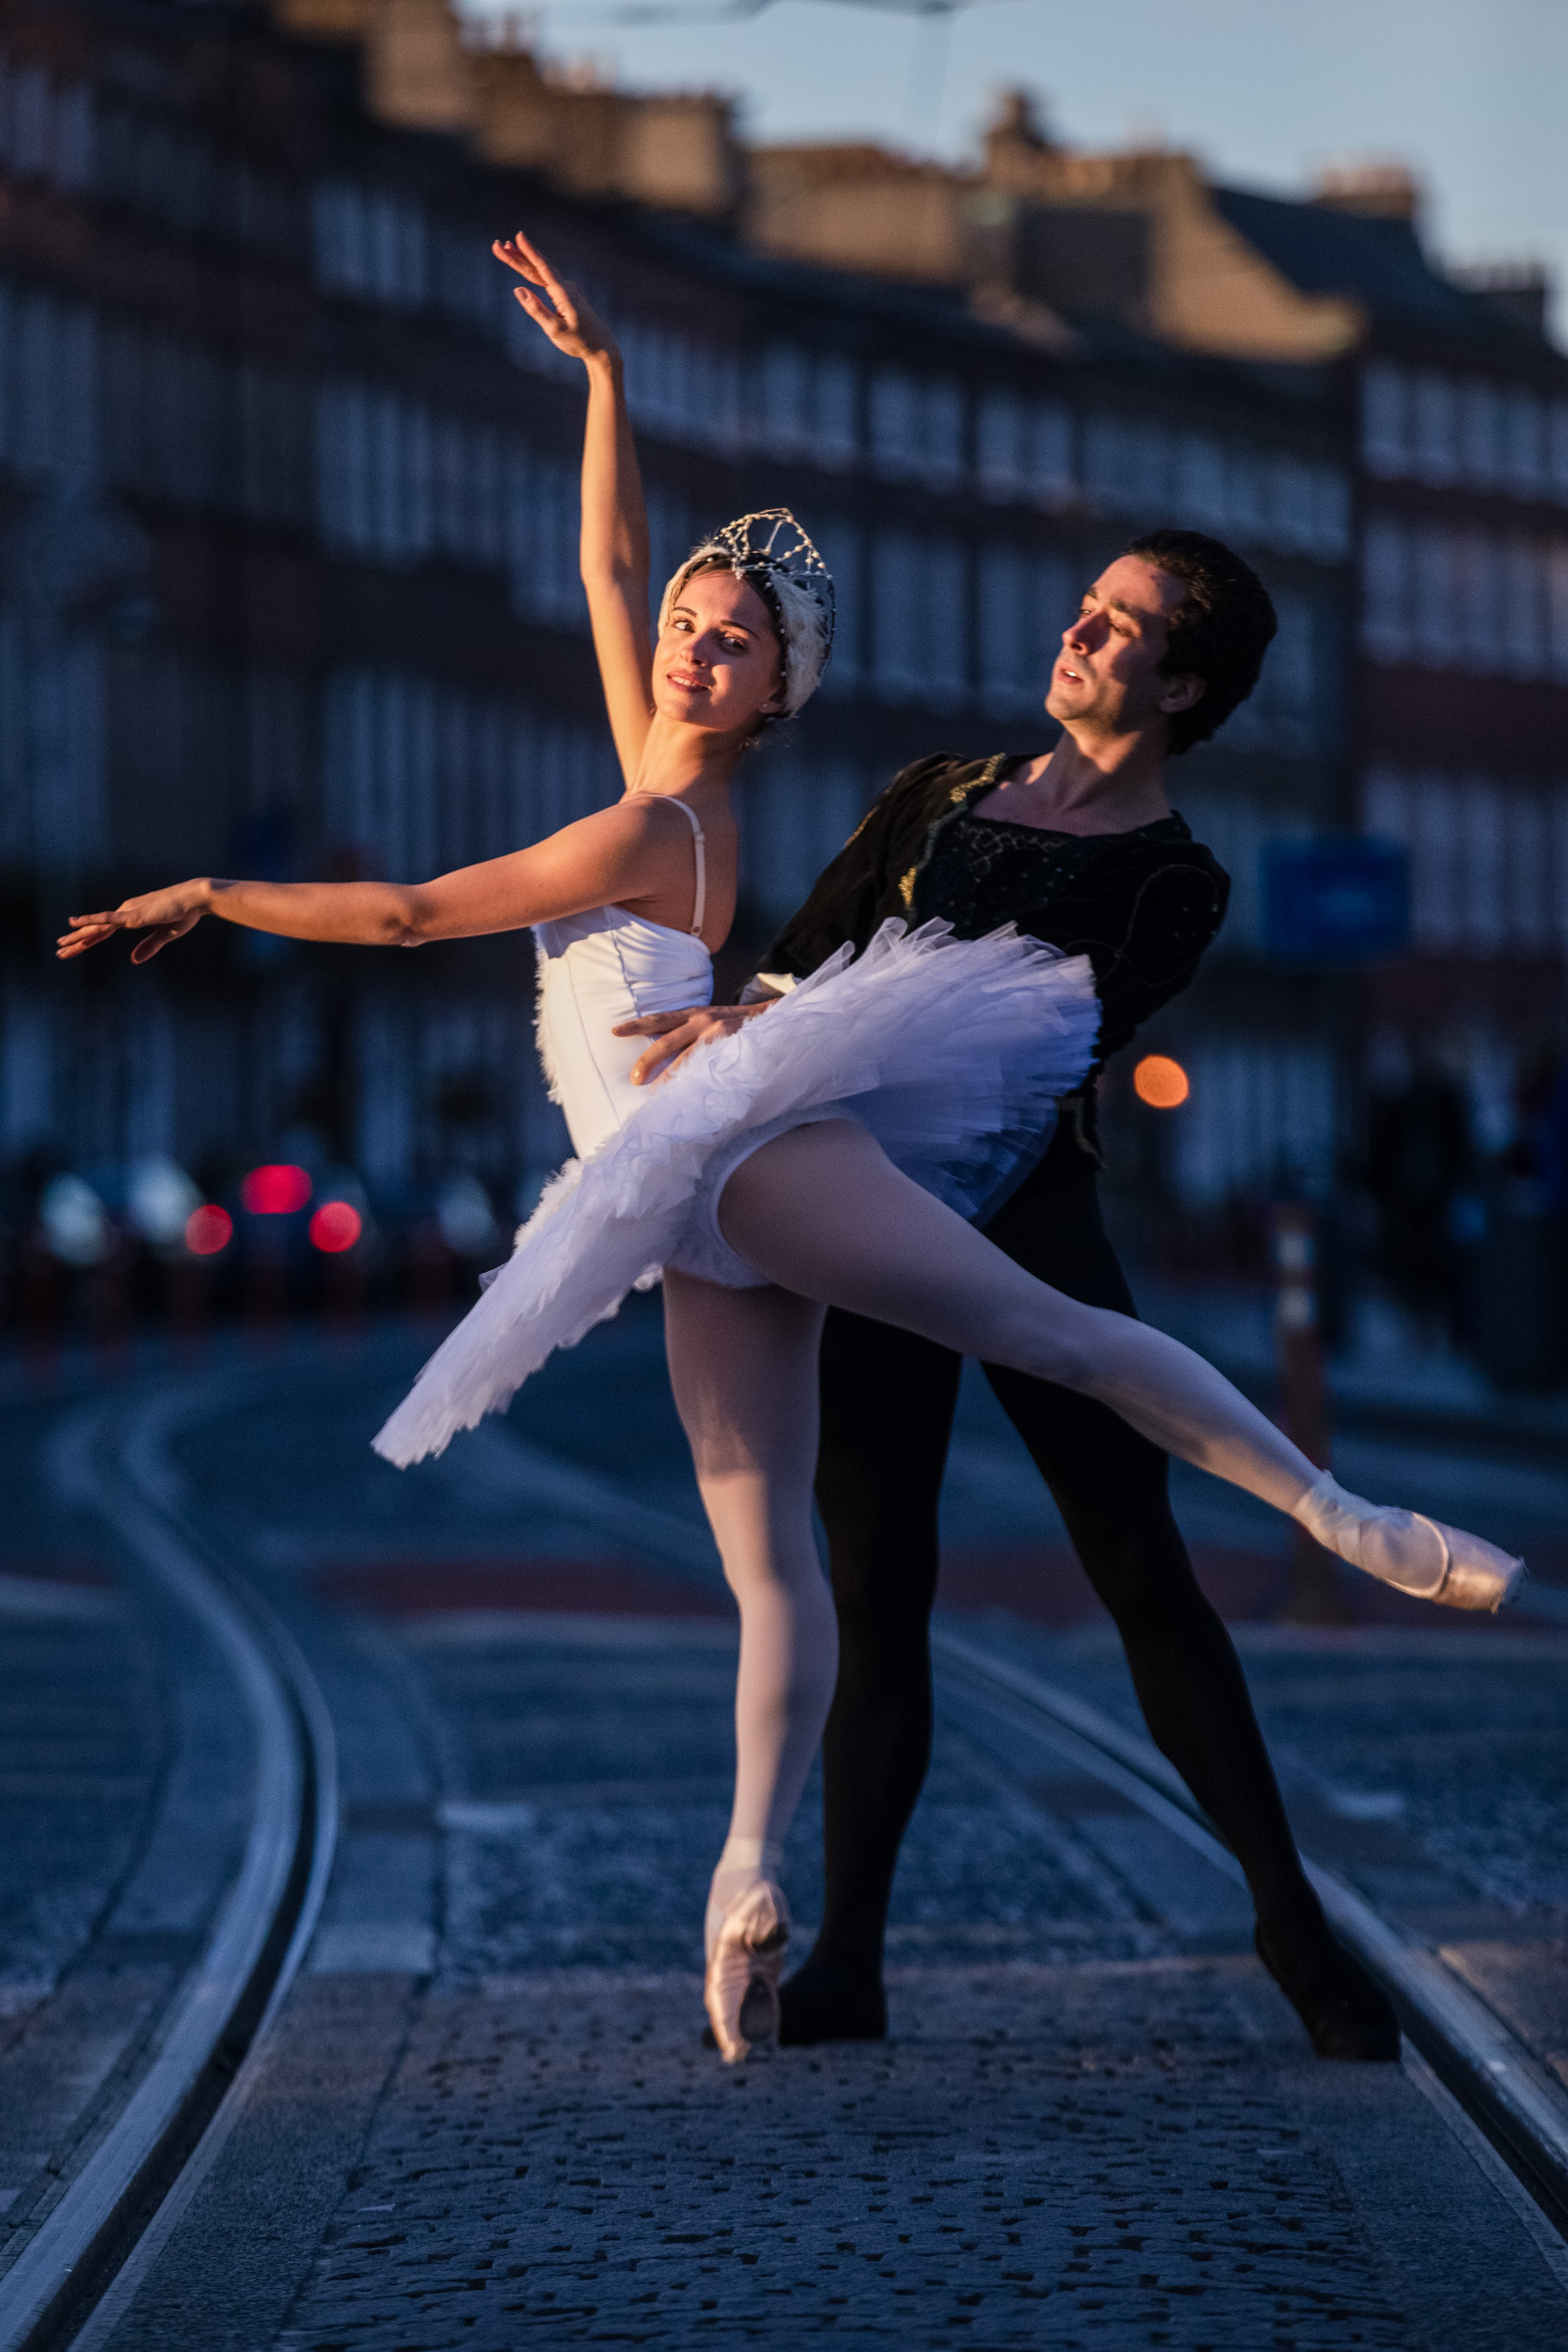 EY Ireland announces corporate sponsorship of Ballet Ireland's tour of Swan Lake. Photo by Naoise Culhane.